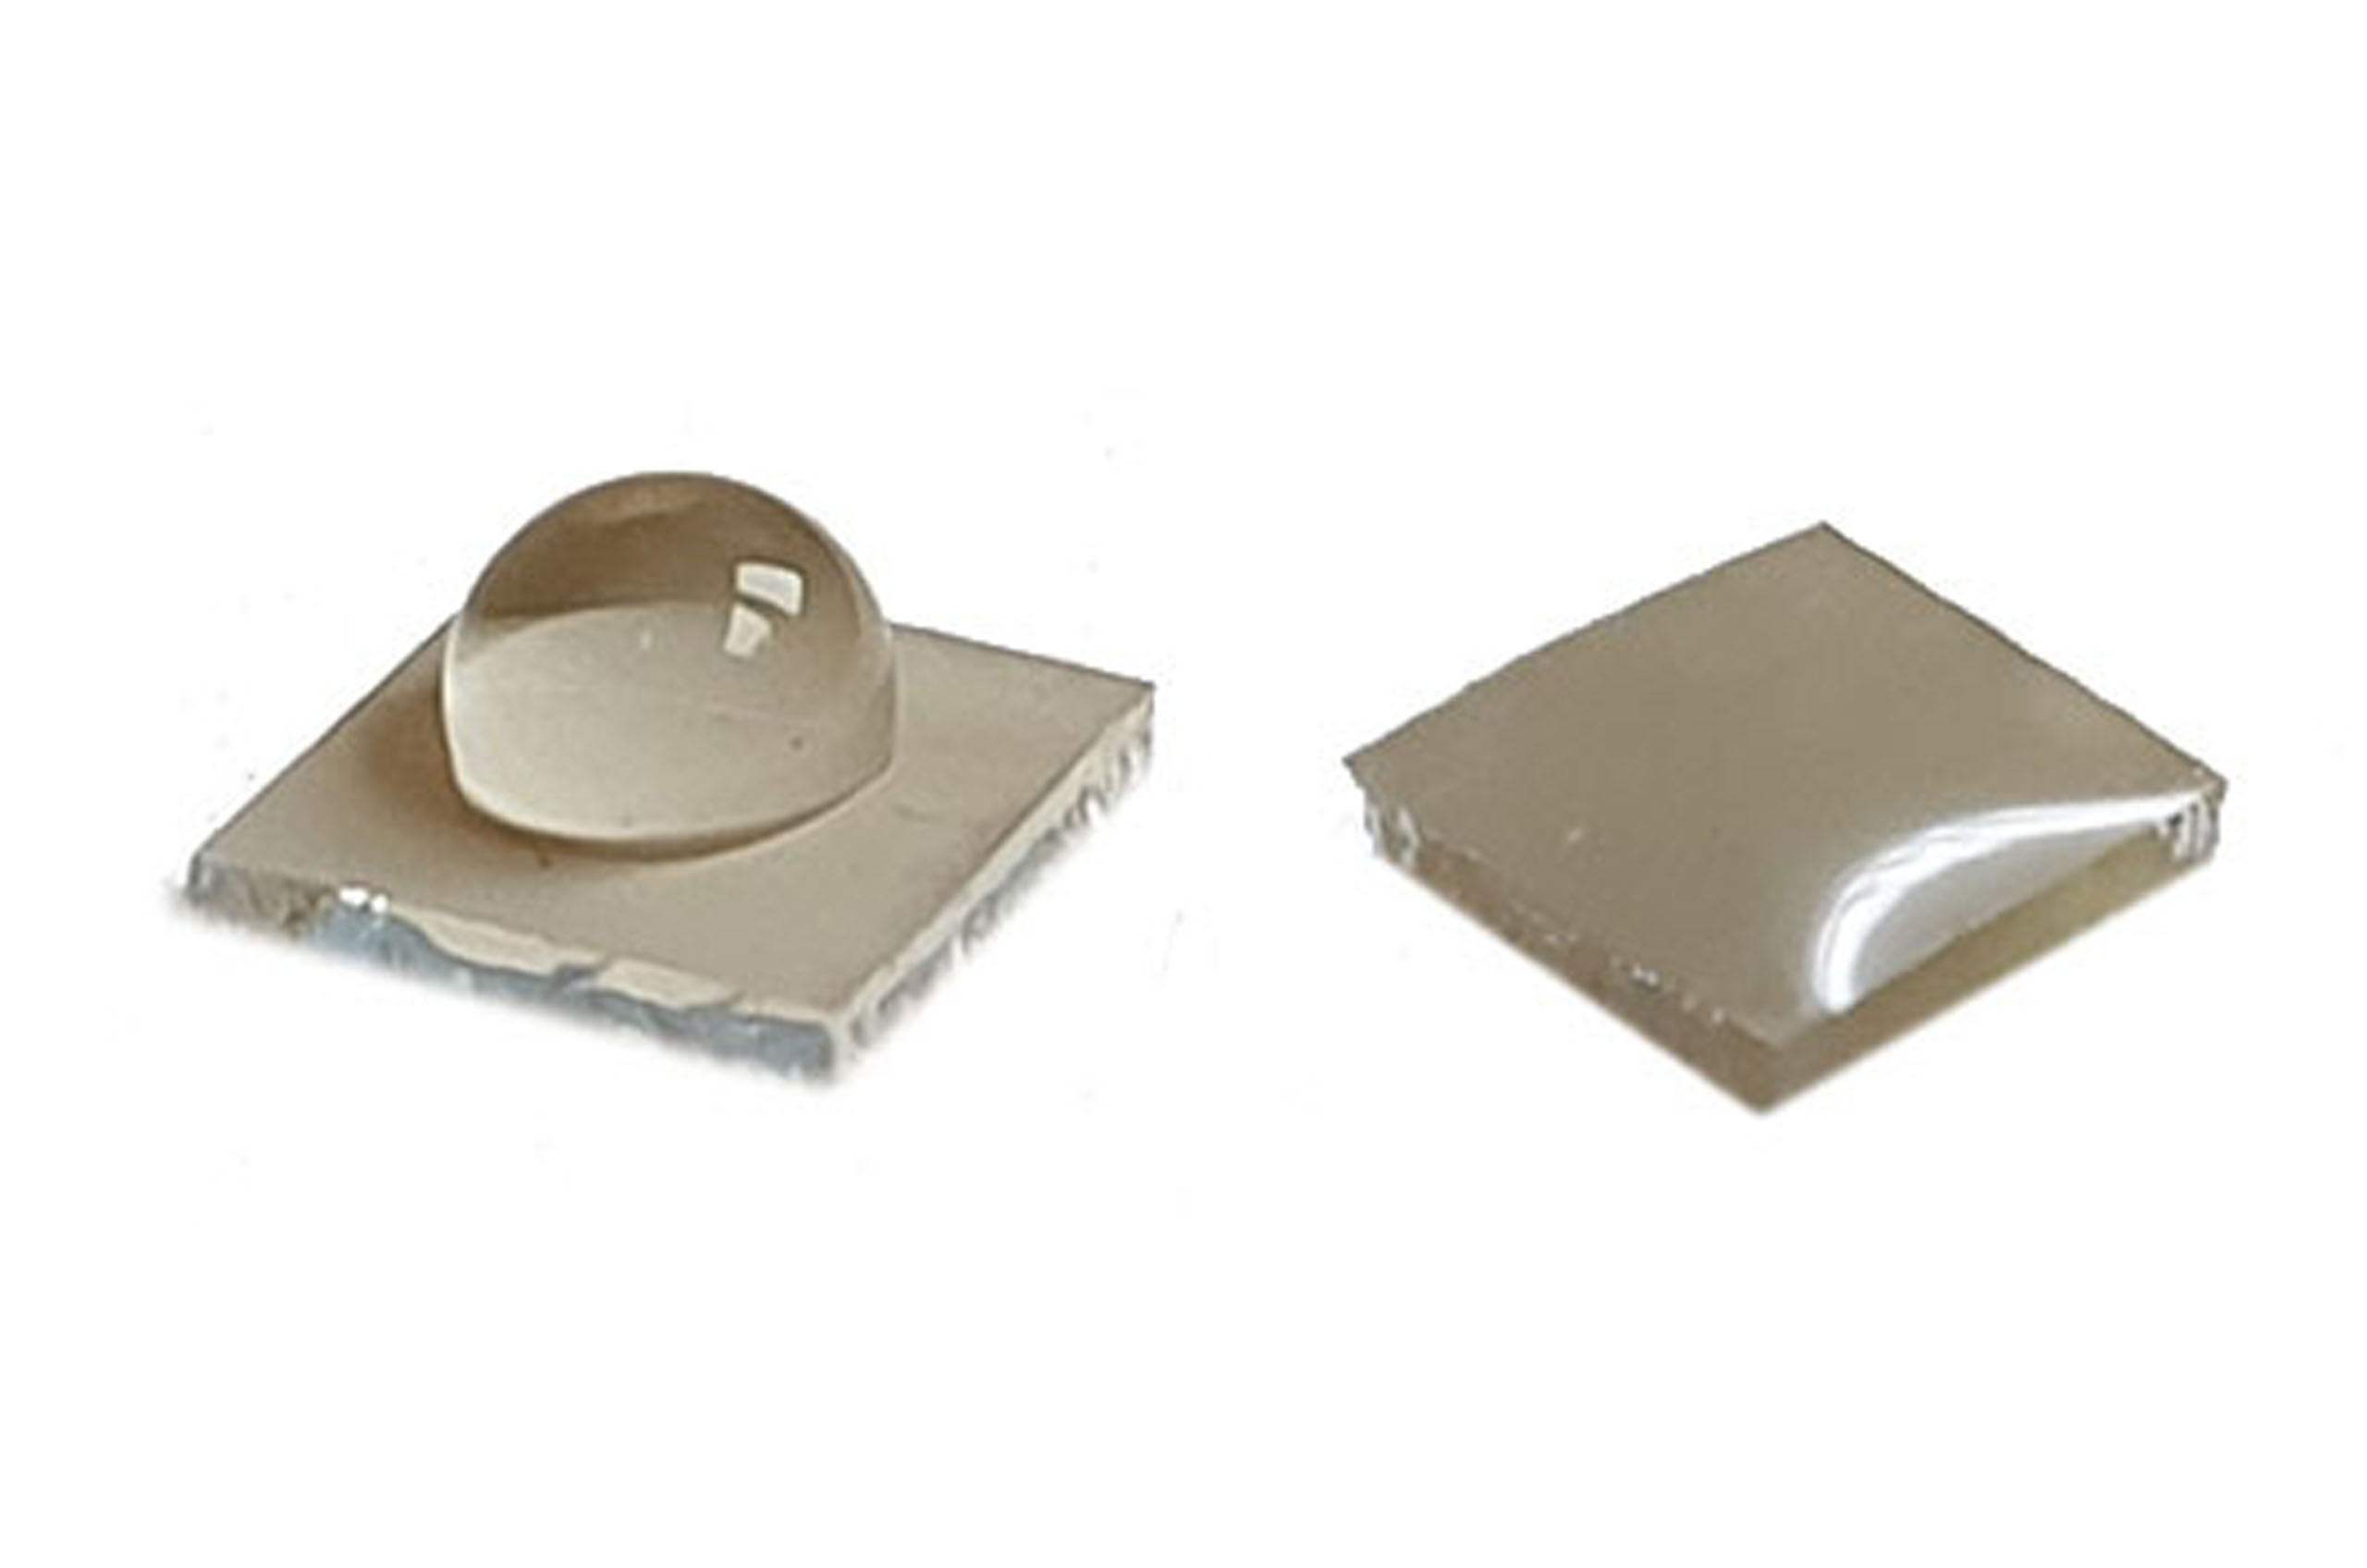 SERSitive substrates from "S" series, left with a hydrophobic surface, right with hydrophilic surface